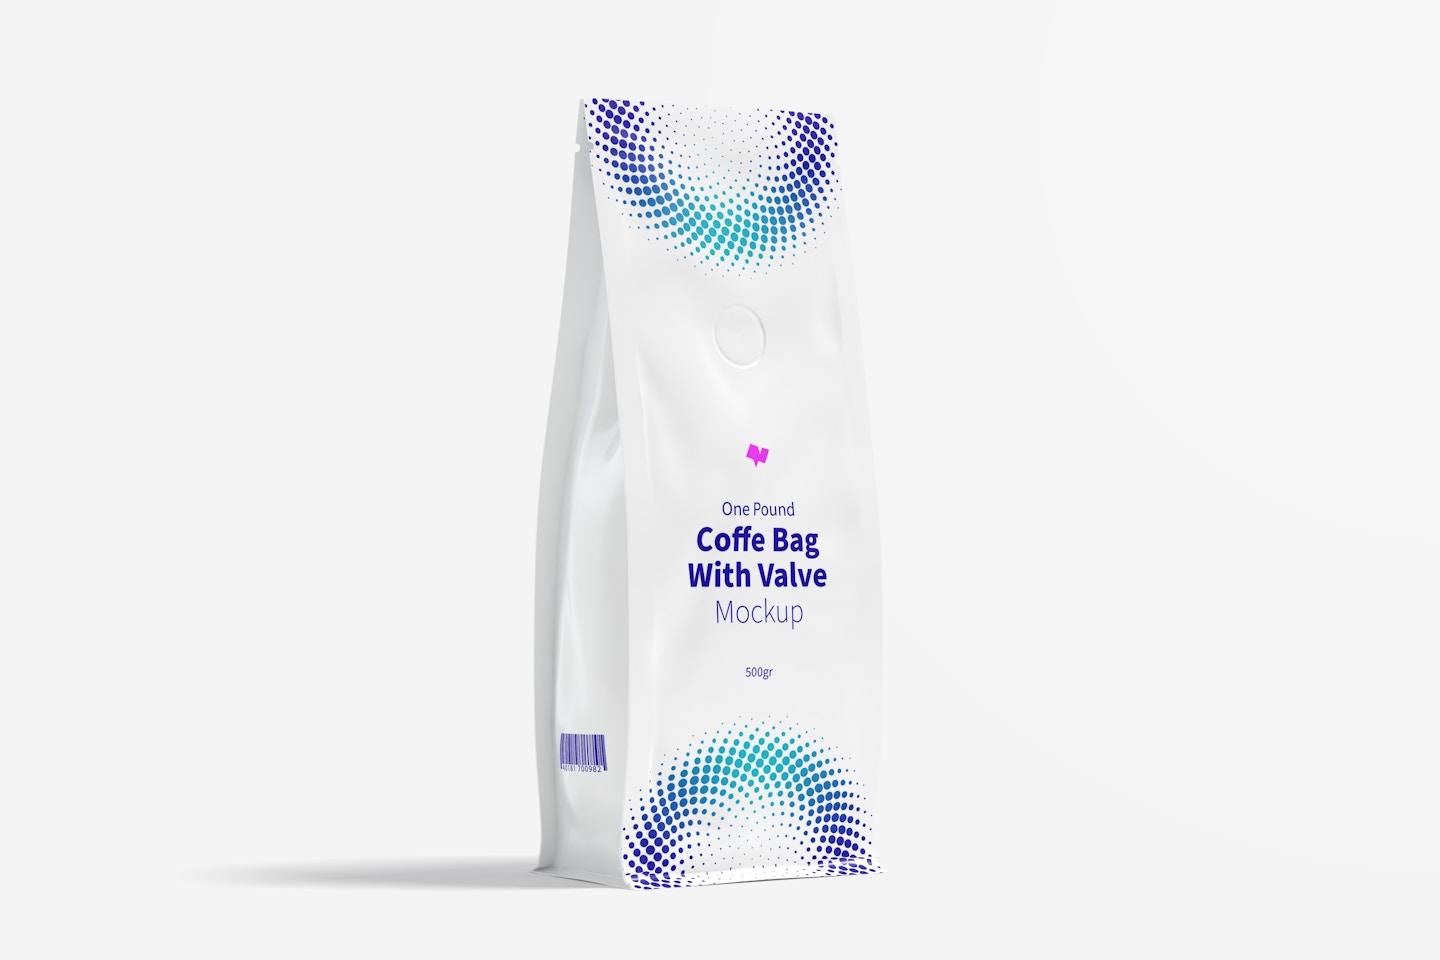 One Pound Coffee Bag with Valve Mockup, Side View